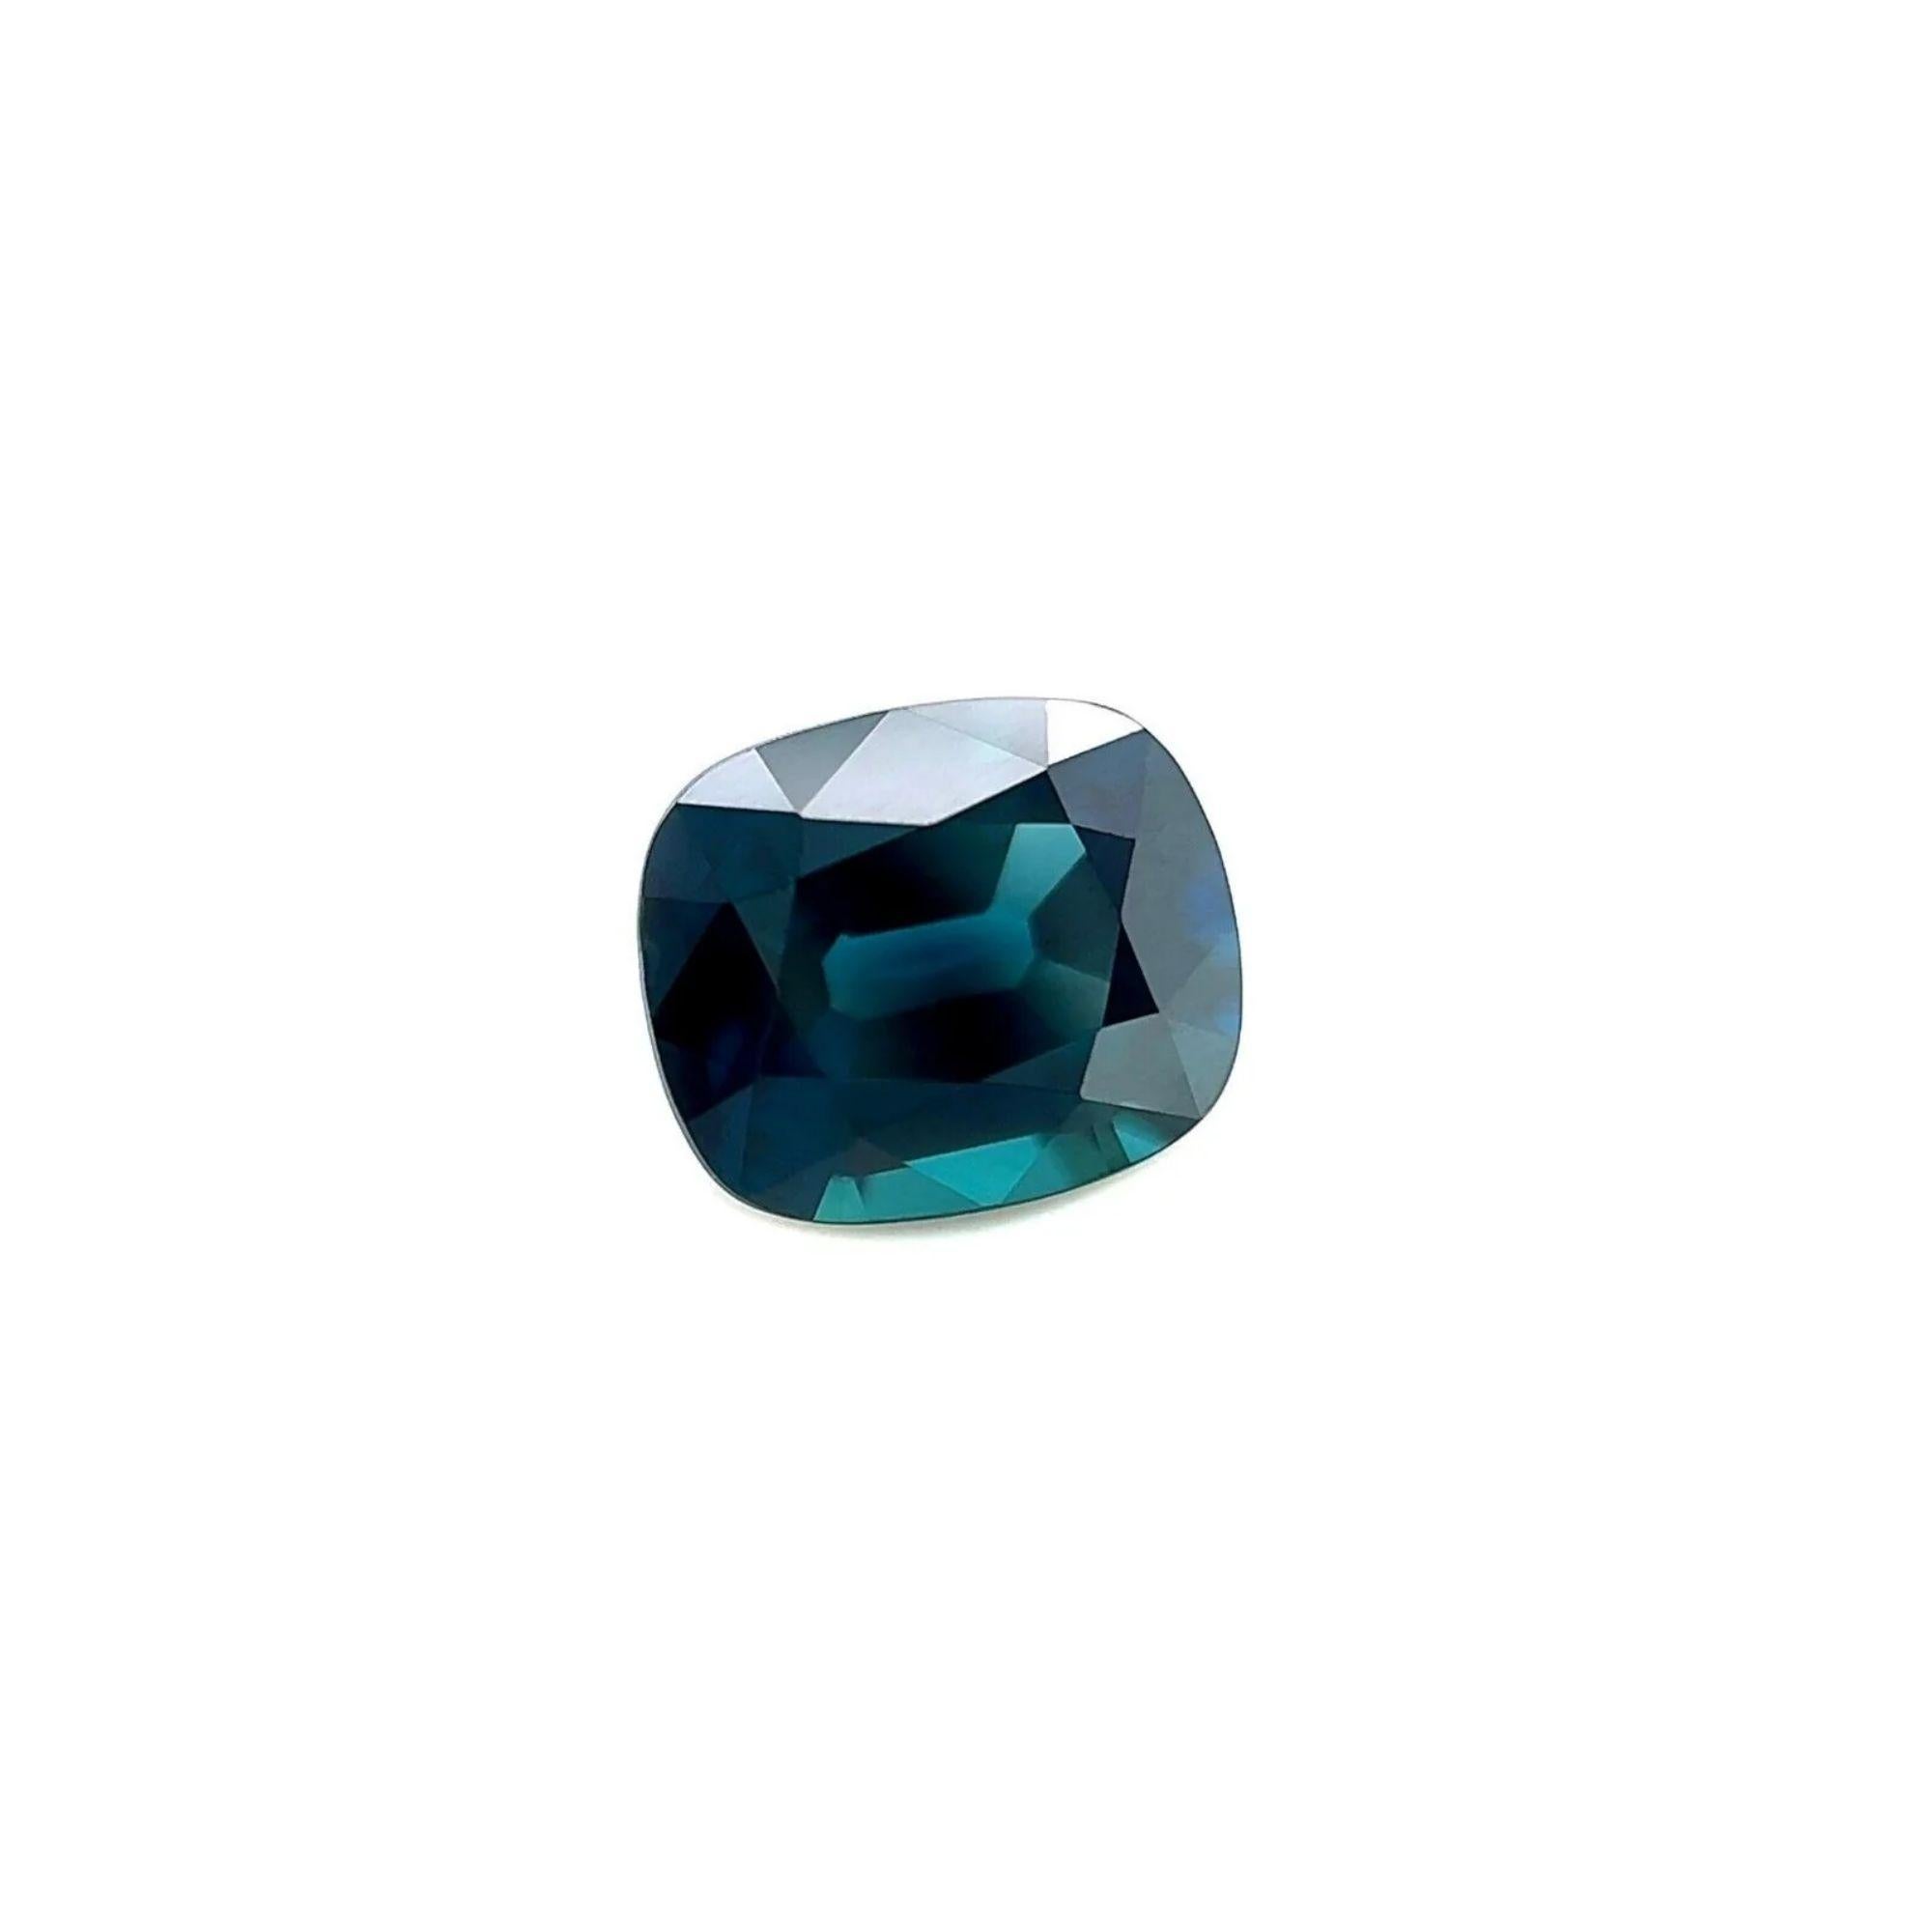 1.10ct Teal Blue Sapphire Untreated GRA Certified Cushion Cut No Heat 6.4x5.4mm

GRA Certified Fine Teal Blue Sapphire Untreated Loose Gem.
1.10 Carat sapphire with a beautiful teal blue colour and excellent clarity, very clean stone. VVS
Fully